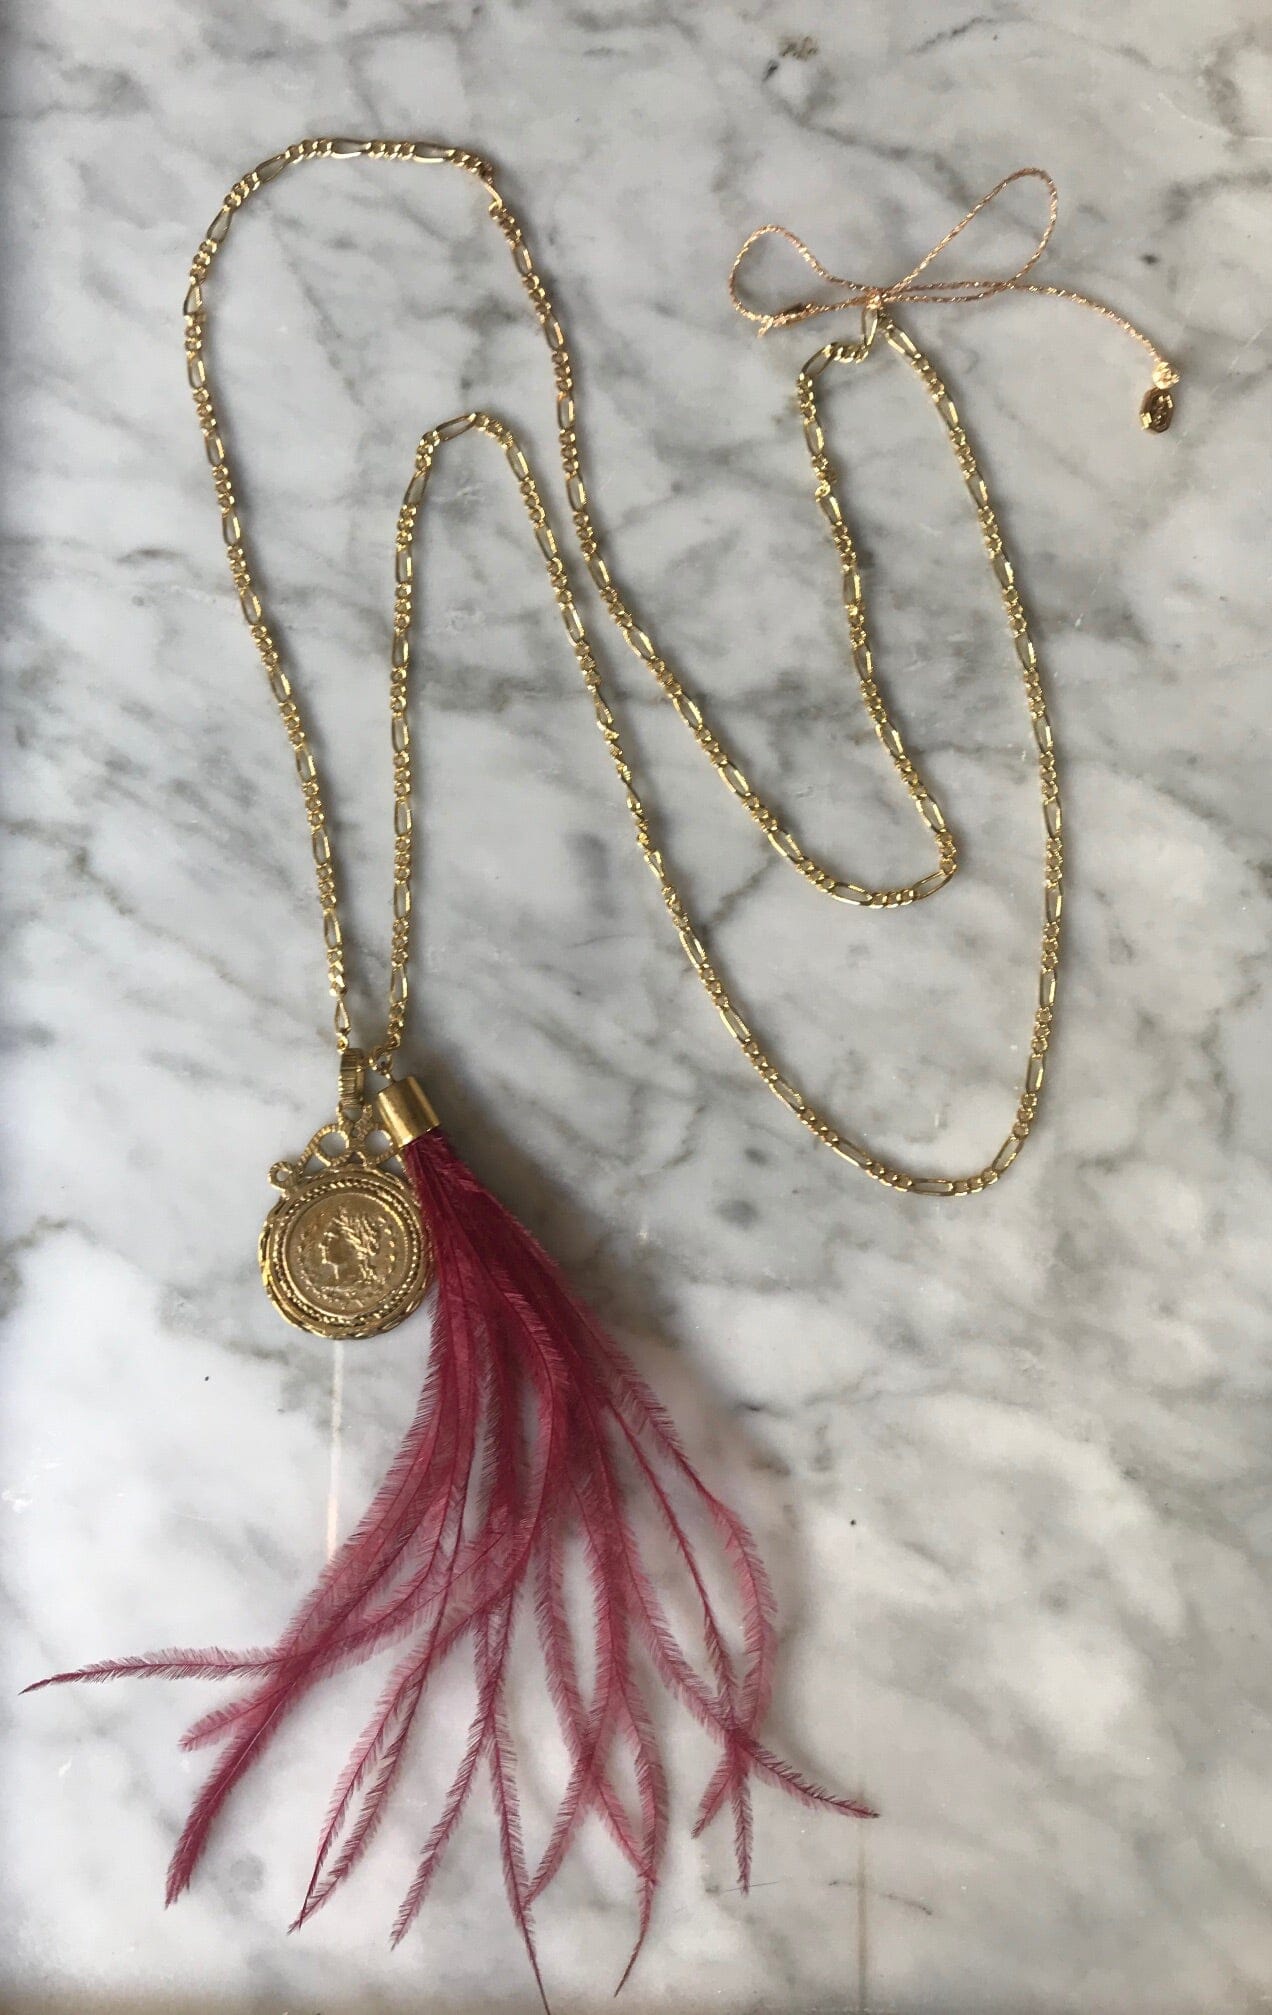 tassel  stunning  simple  red  pink  necklace  medal  maroon  jewelry  jewellery  gold  glamorous  frilly  feather  cute  colliers  collier  chic  charm  chain  burgundy  brass  boho  bijoux